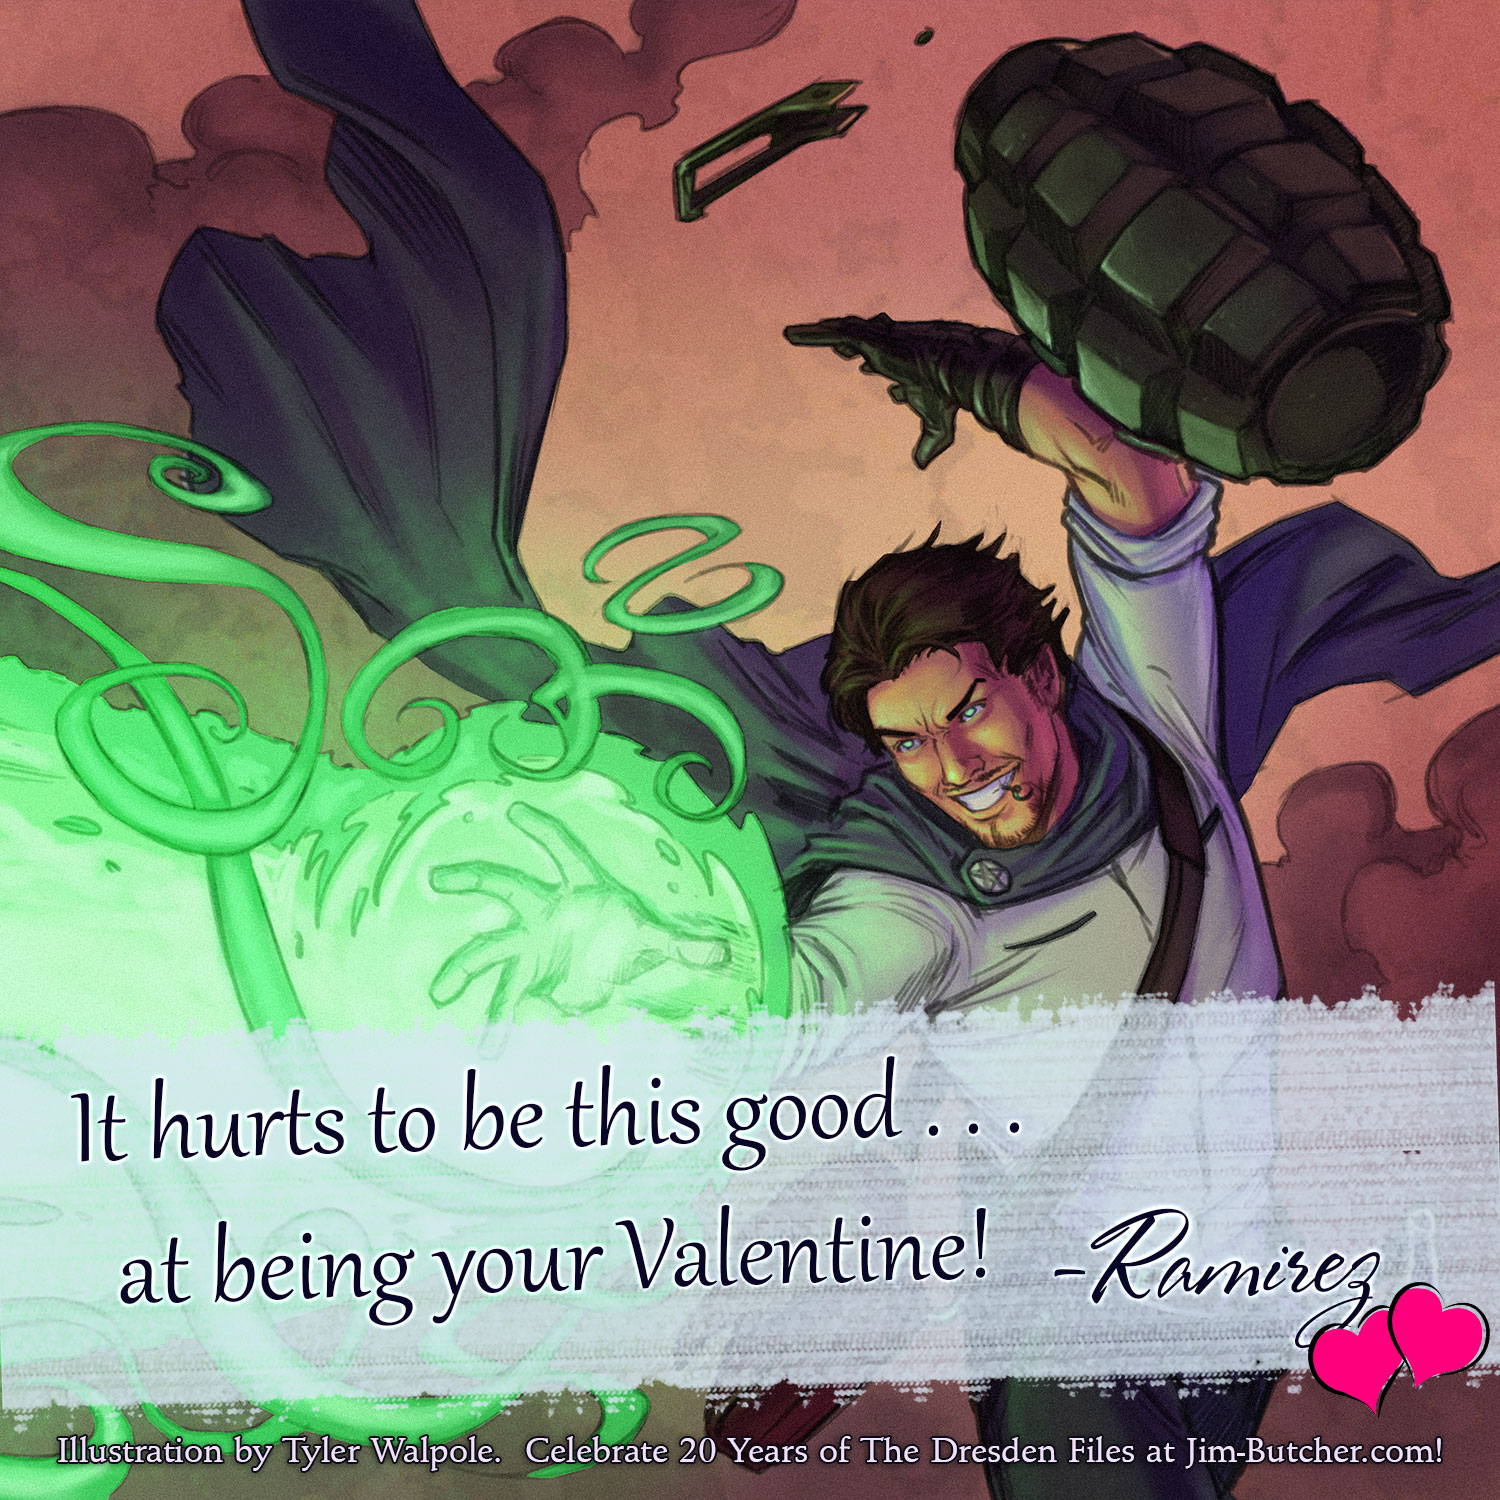 Ramirez: It hurts to be this good... at being your Valentine!